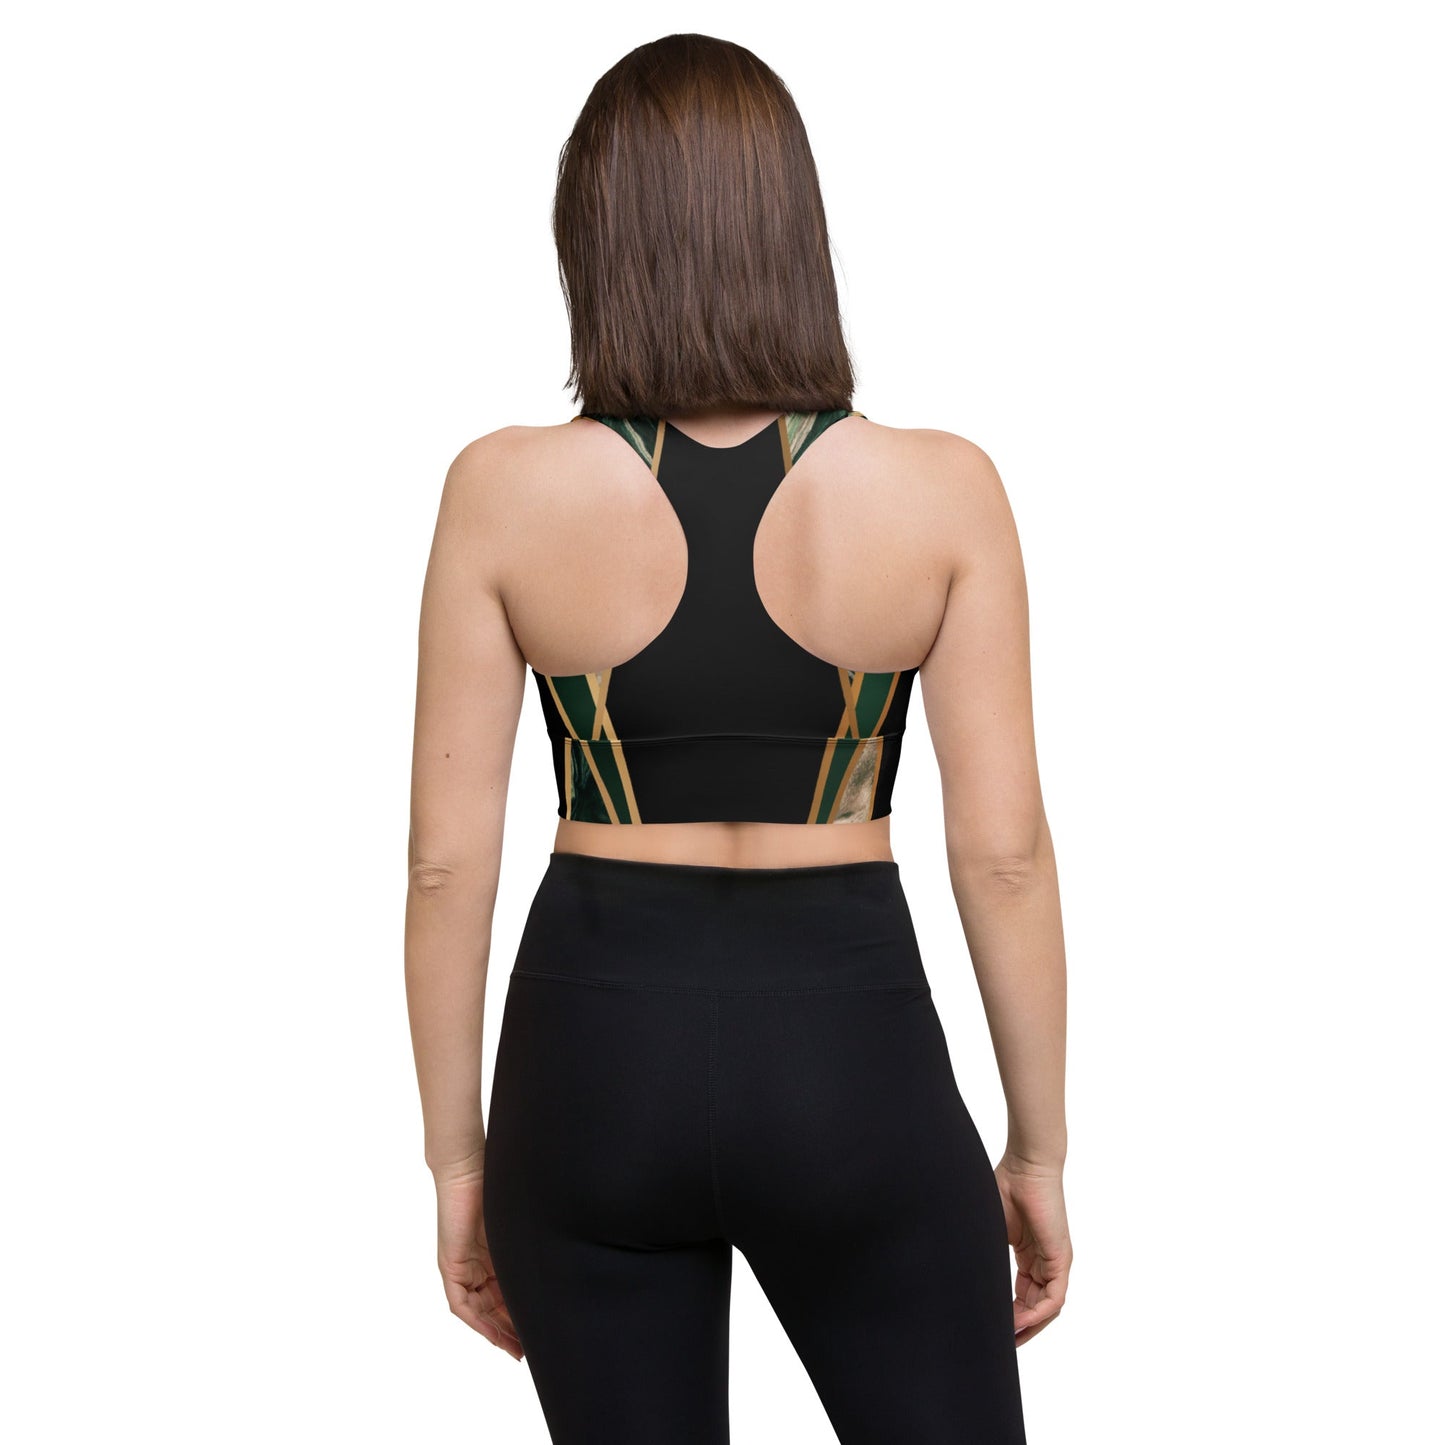 bonotee.com: adidas sports bras bare breasts, sports bra, longline bra uk, white sports bras, sports bras for running